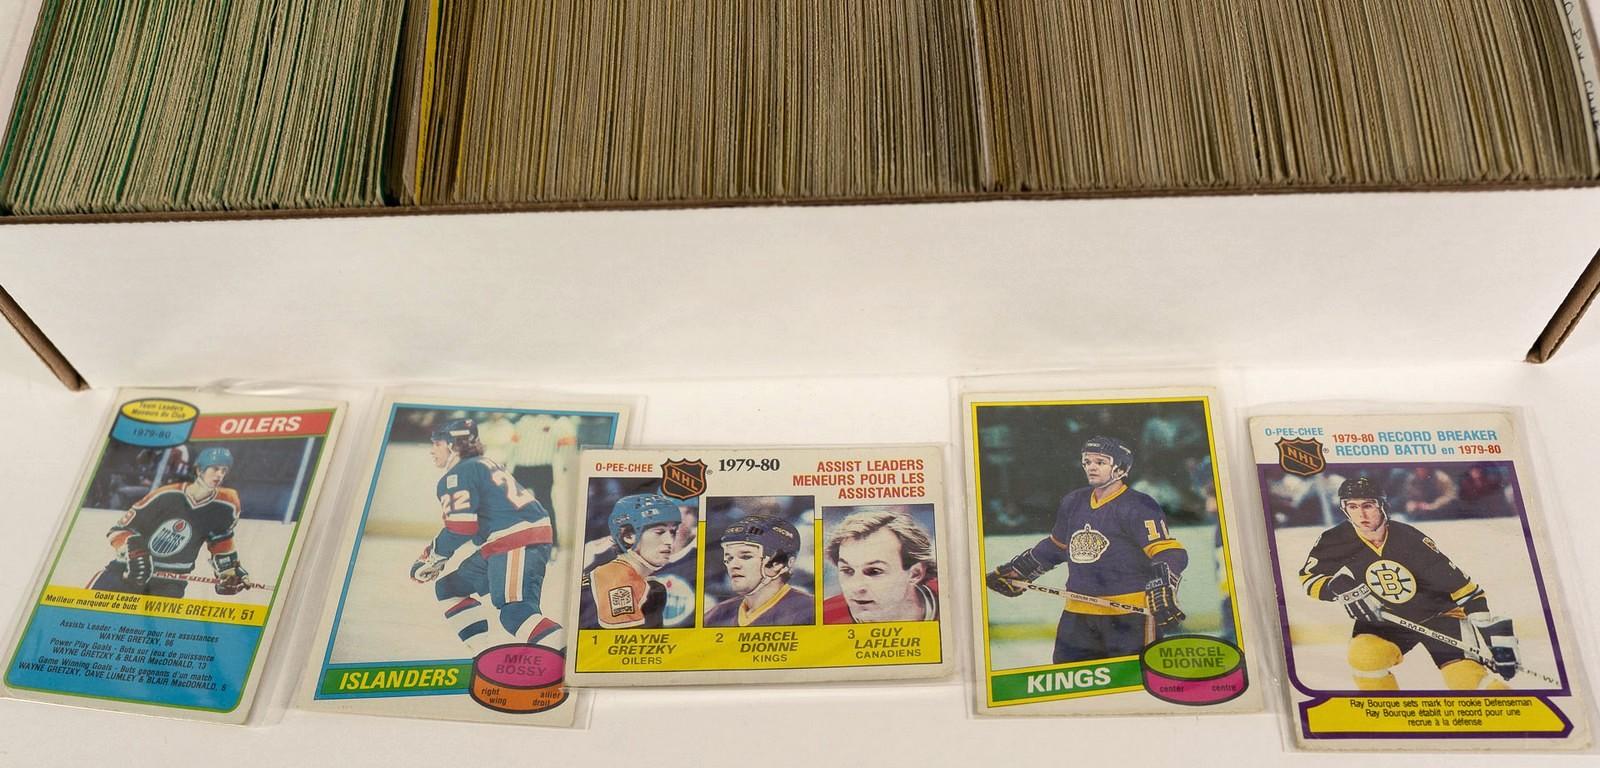 2 BOXES OF 1970'S AND 80'S HOCKEY CARDS